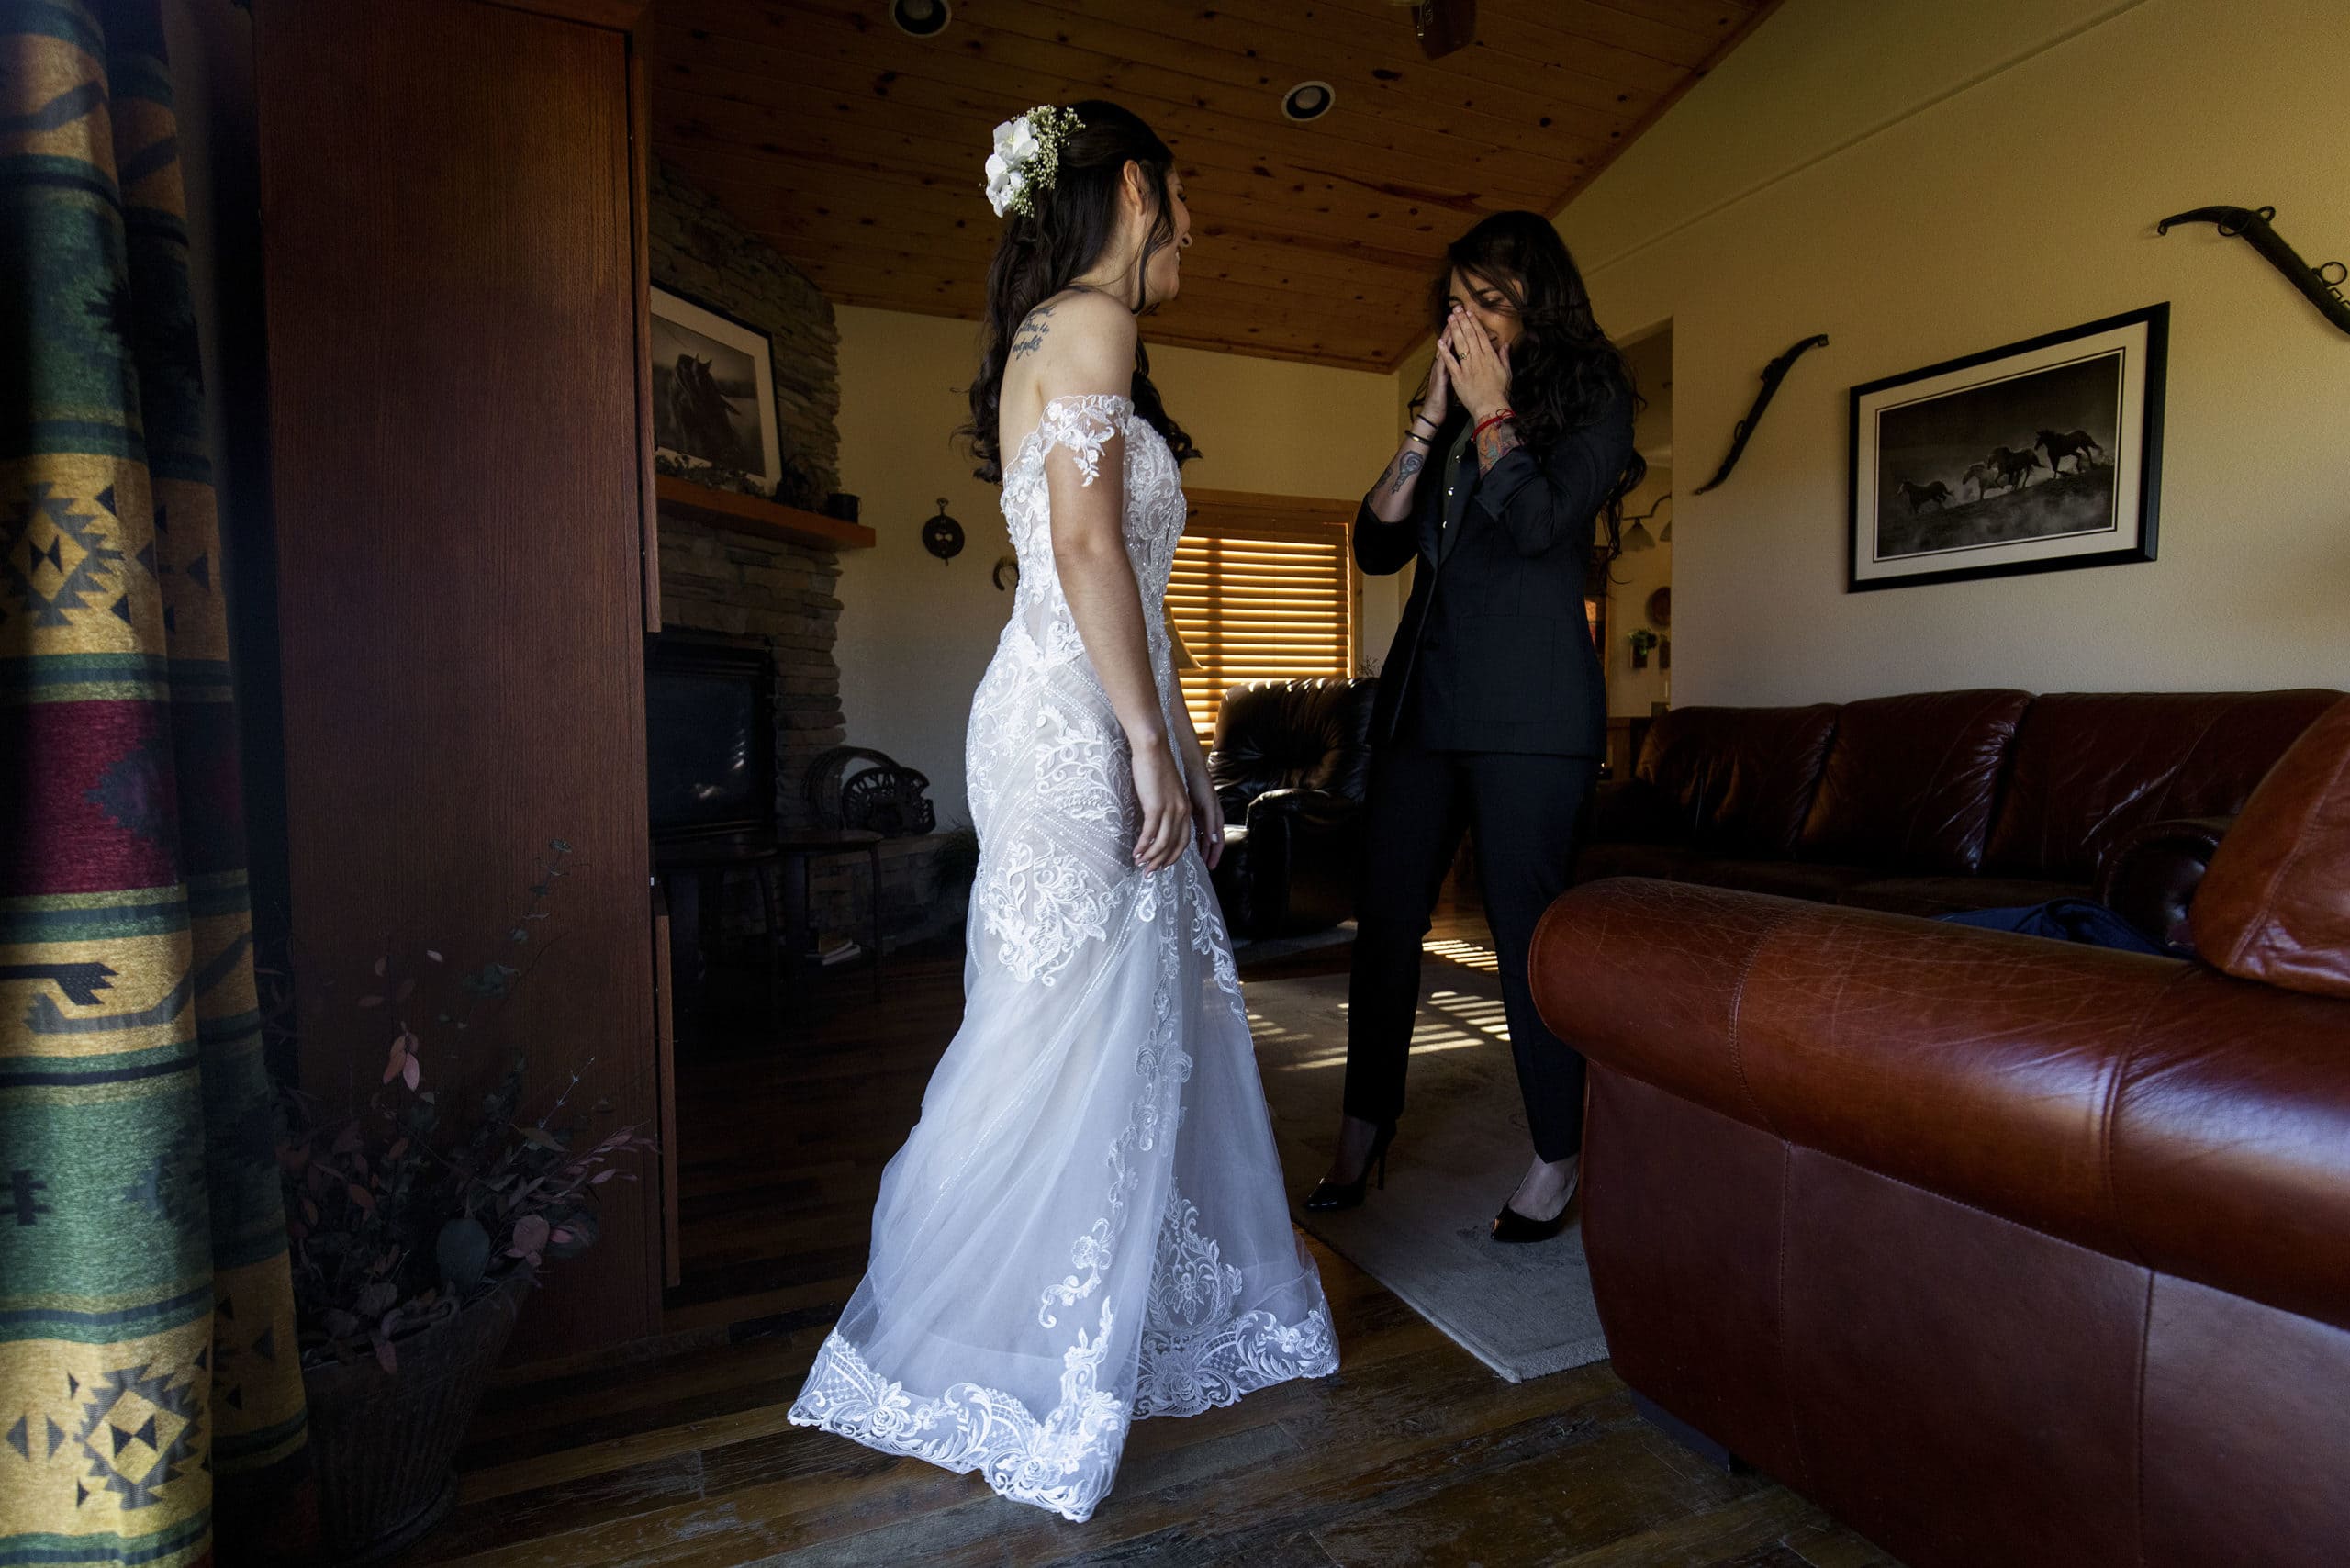 The bride’s friend reacts to seeing her in her wedding dress